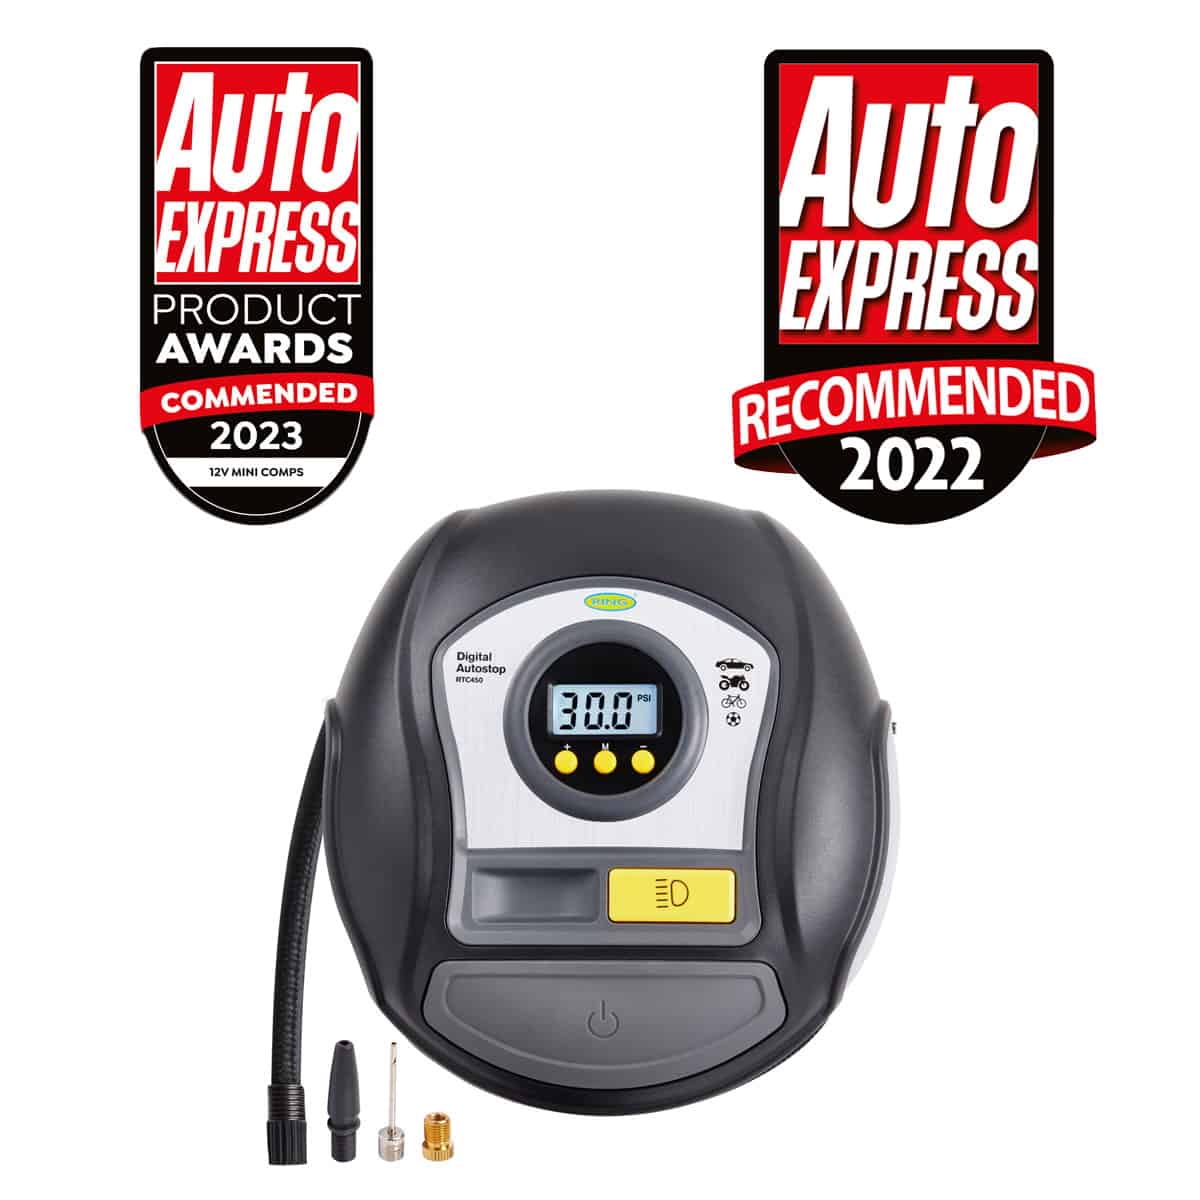 Ring RTC450 Digital Auto-Stop Tyre Inflator: With its multi-functional capabilities, it can inflate a 13" tyre from flat to full in just 3.5 minutes.